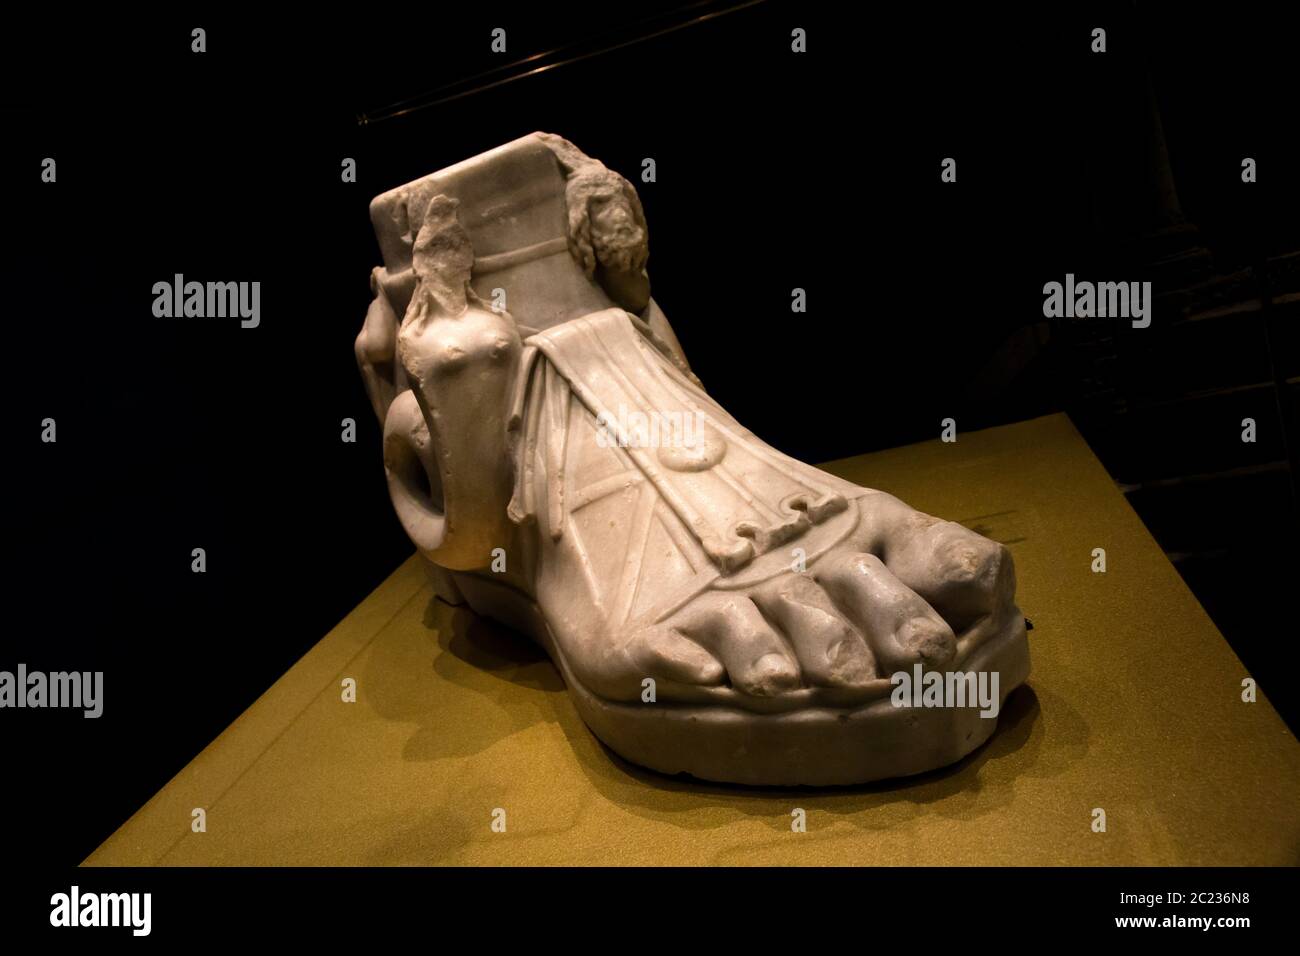 Leiden, The Netherlands JAN 26, 2019: A marble votive foot with snake figurines from Isis and Serapis around it at the exhibition Gods of Egypt in Lei Stock Photo